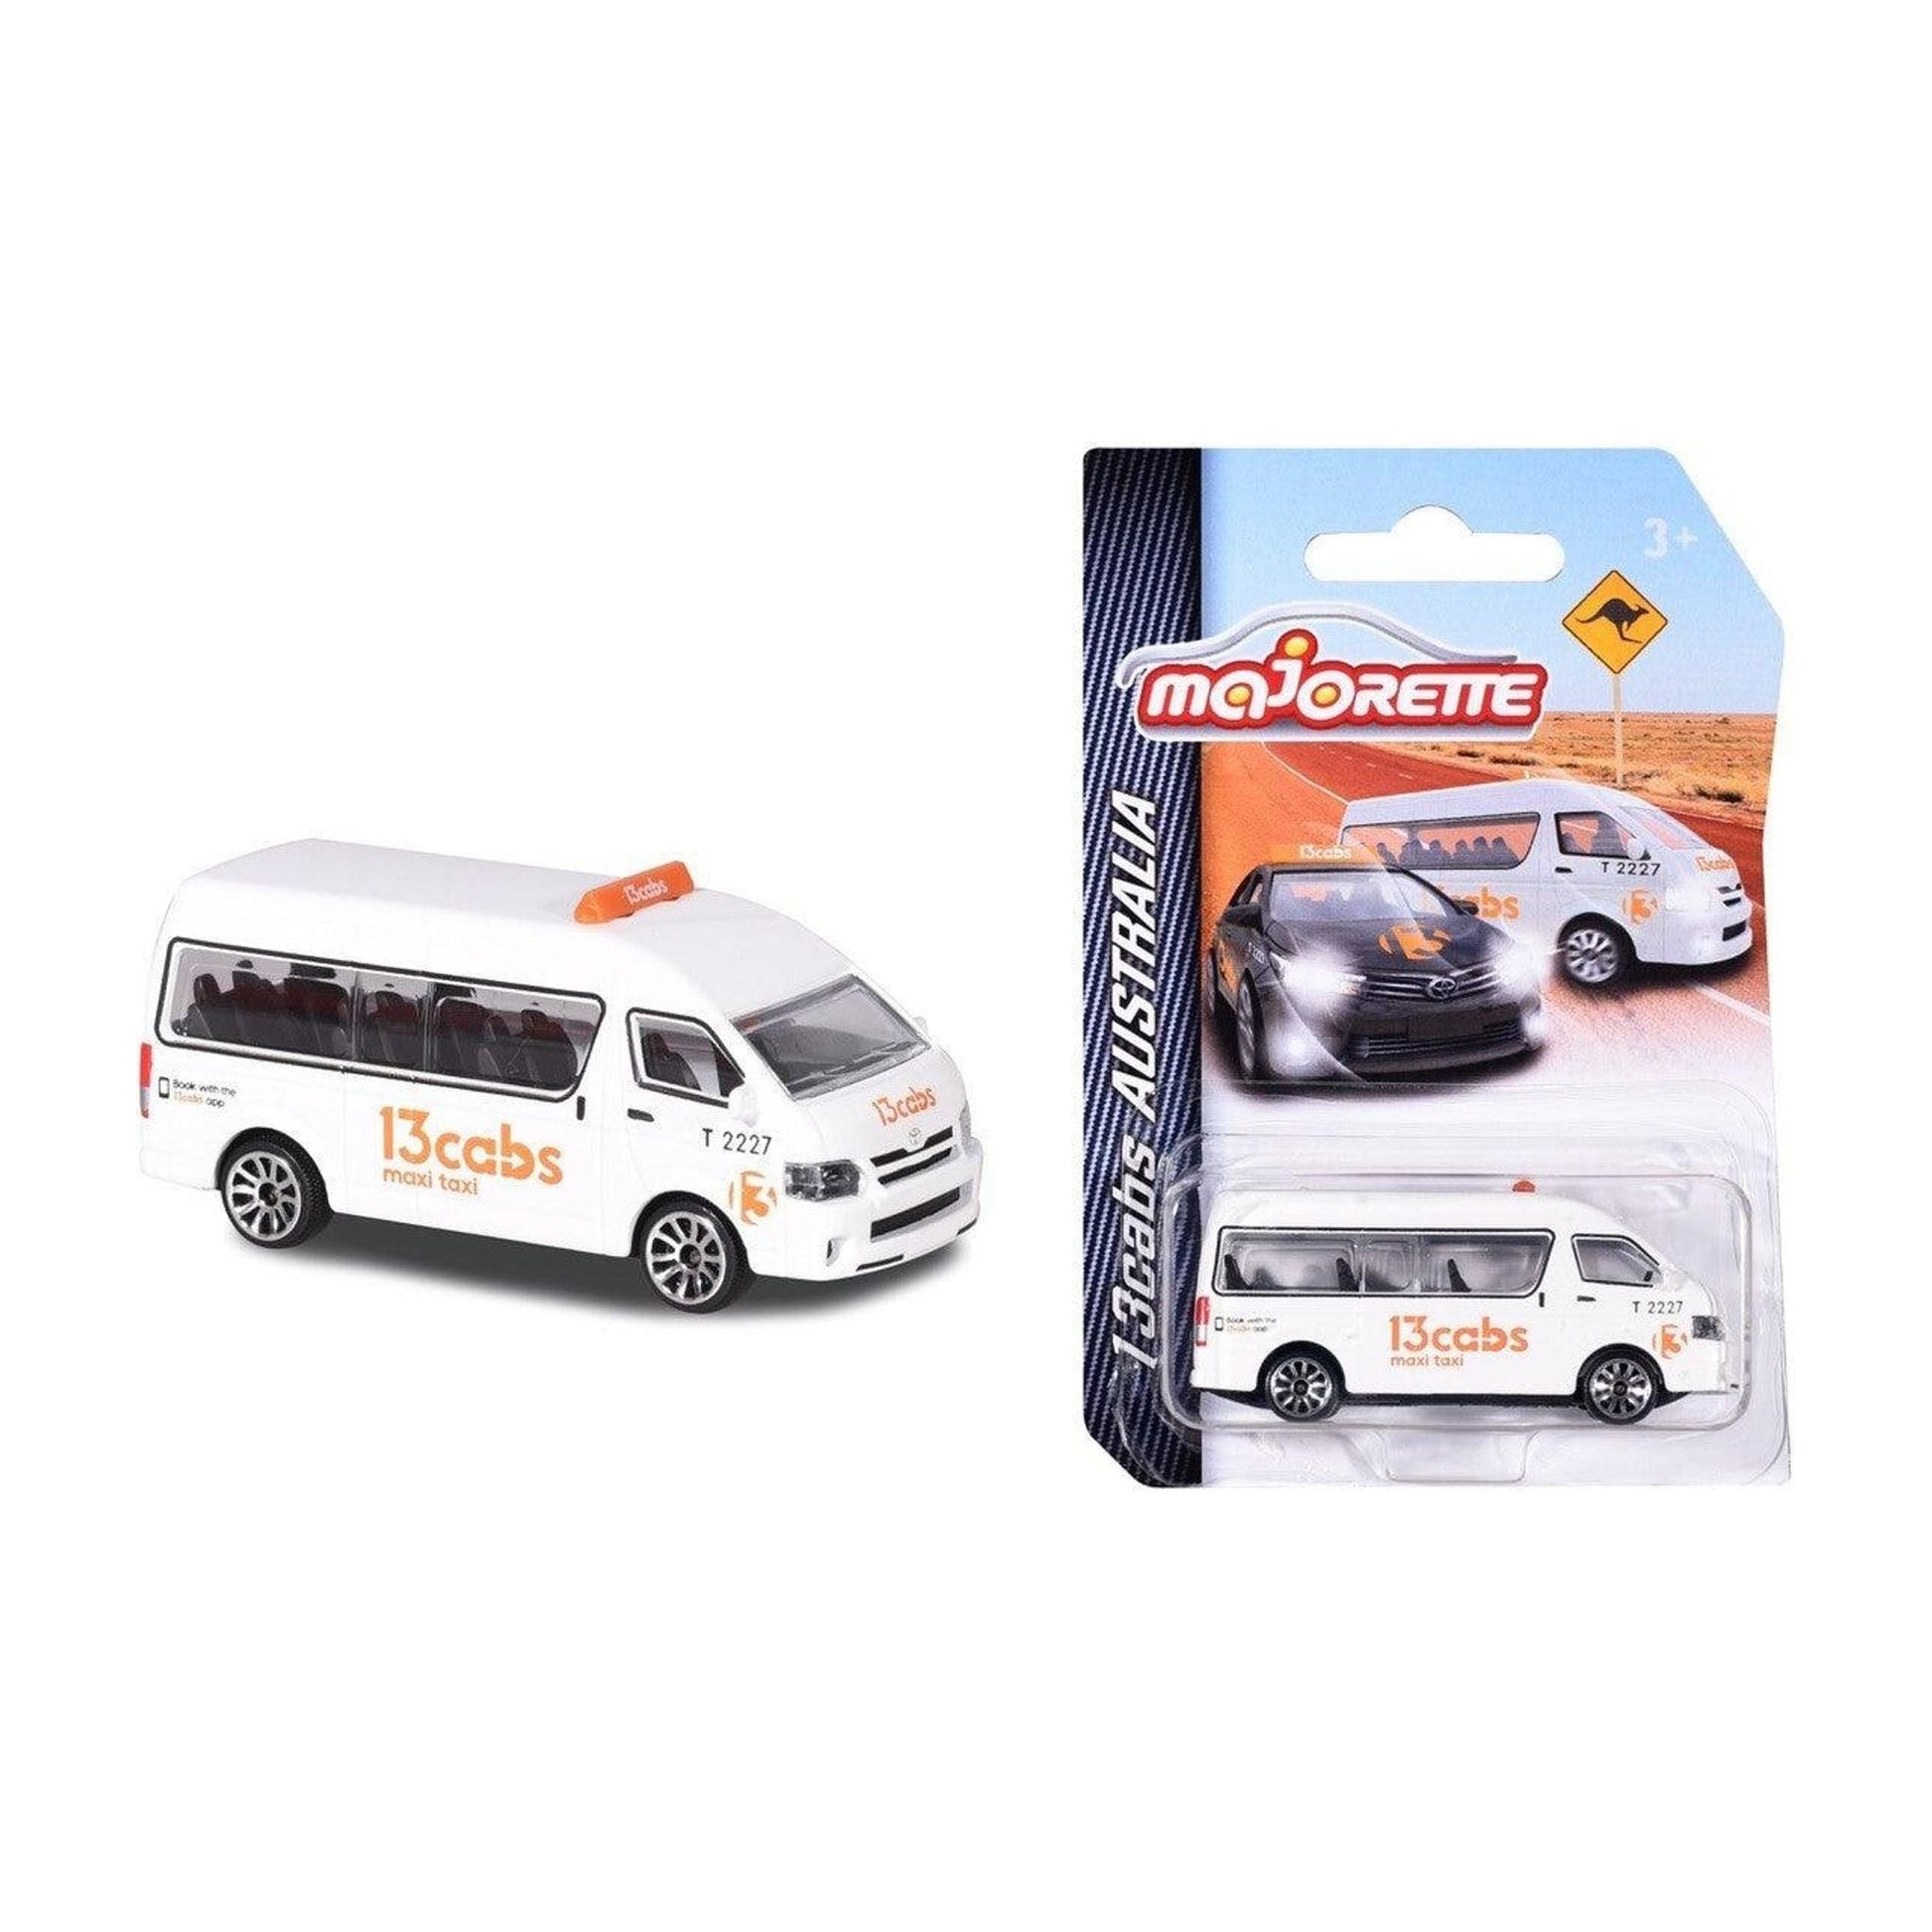 Toyota Hiace Maxi Cab 13 Cabs (White) - Toybox Tales